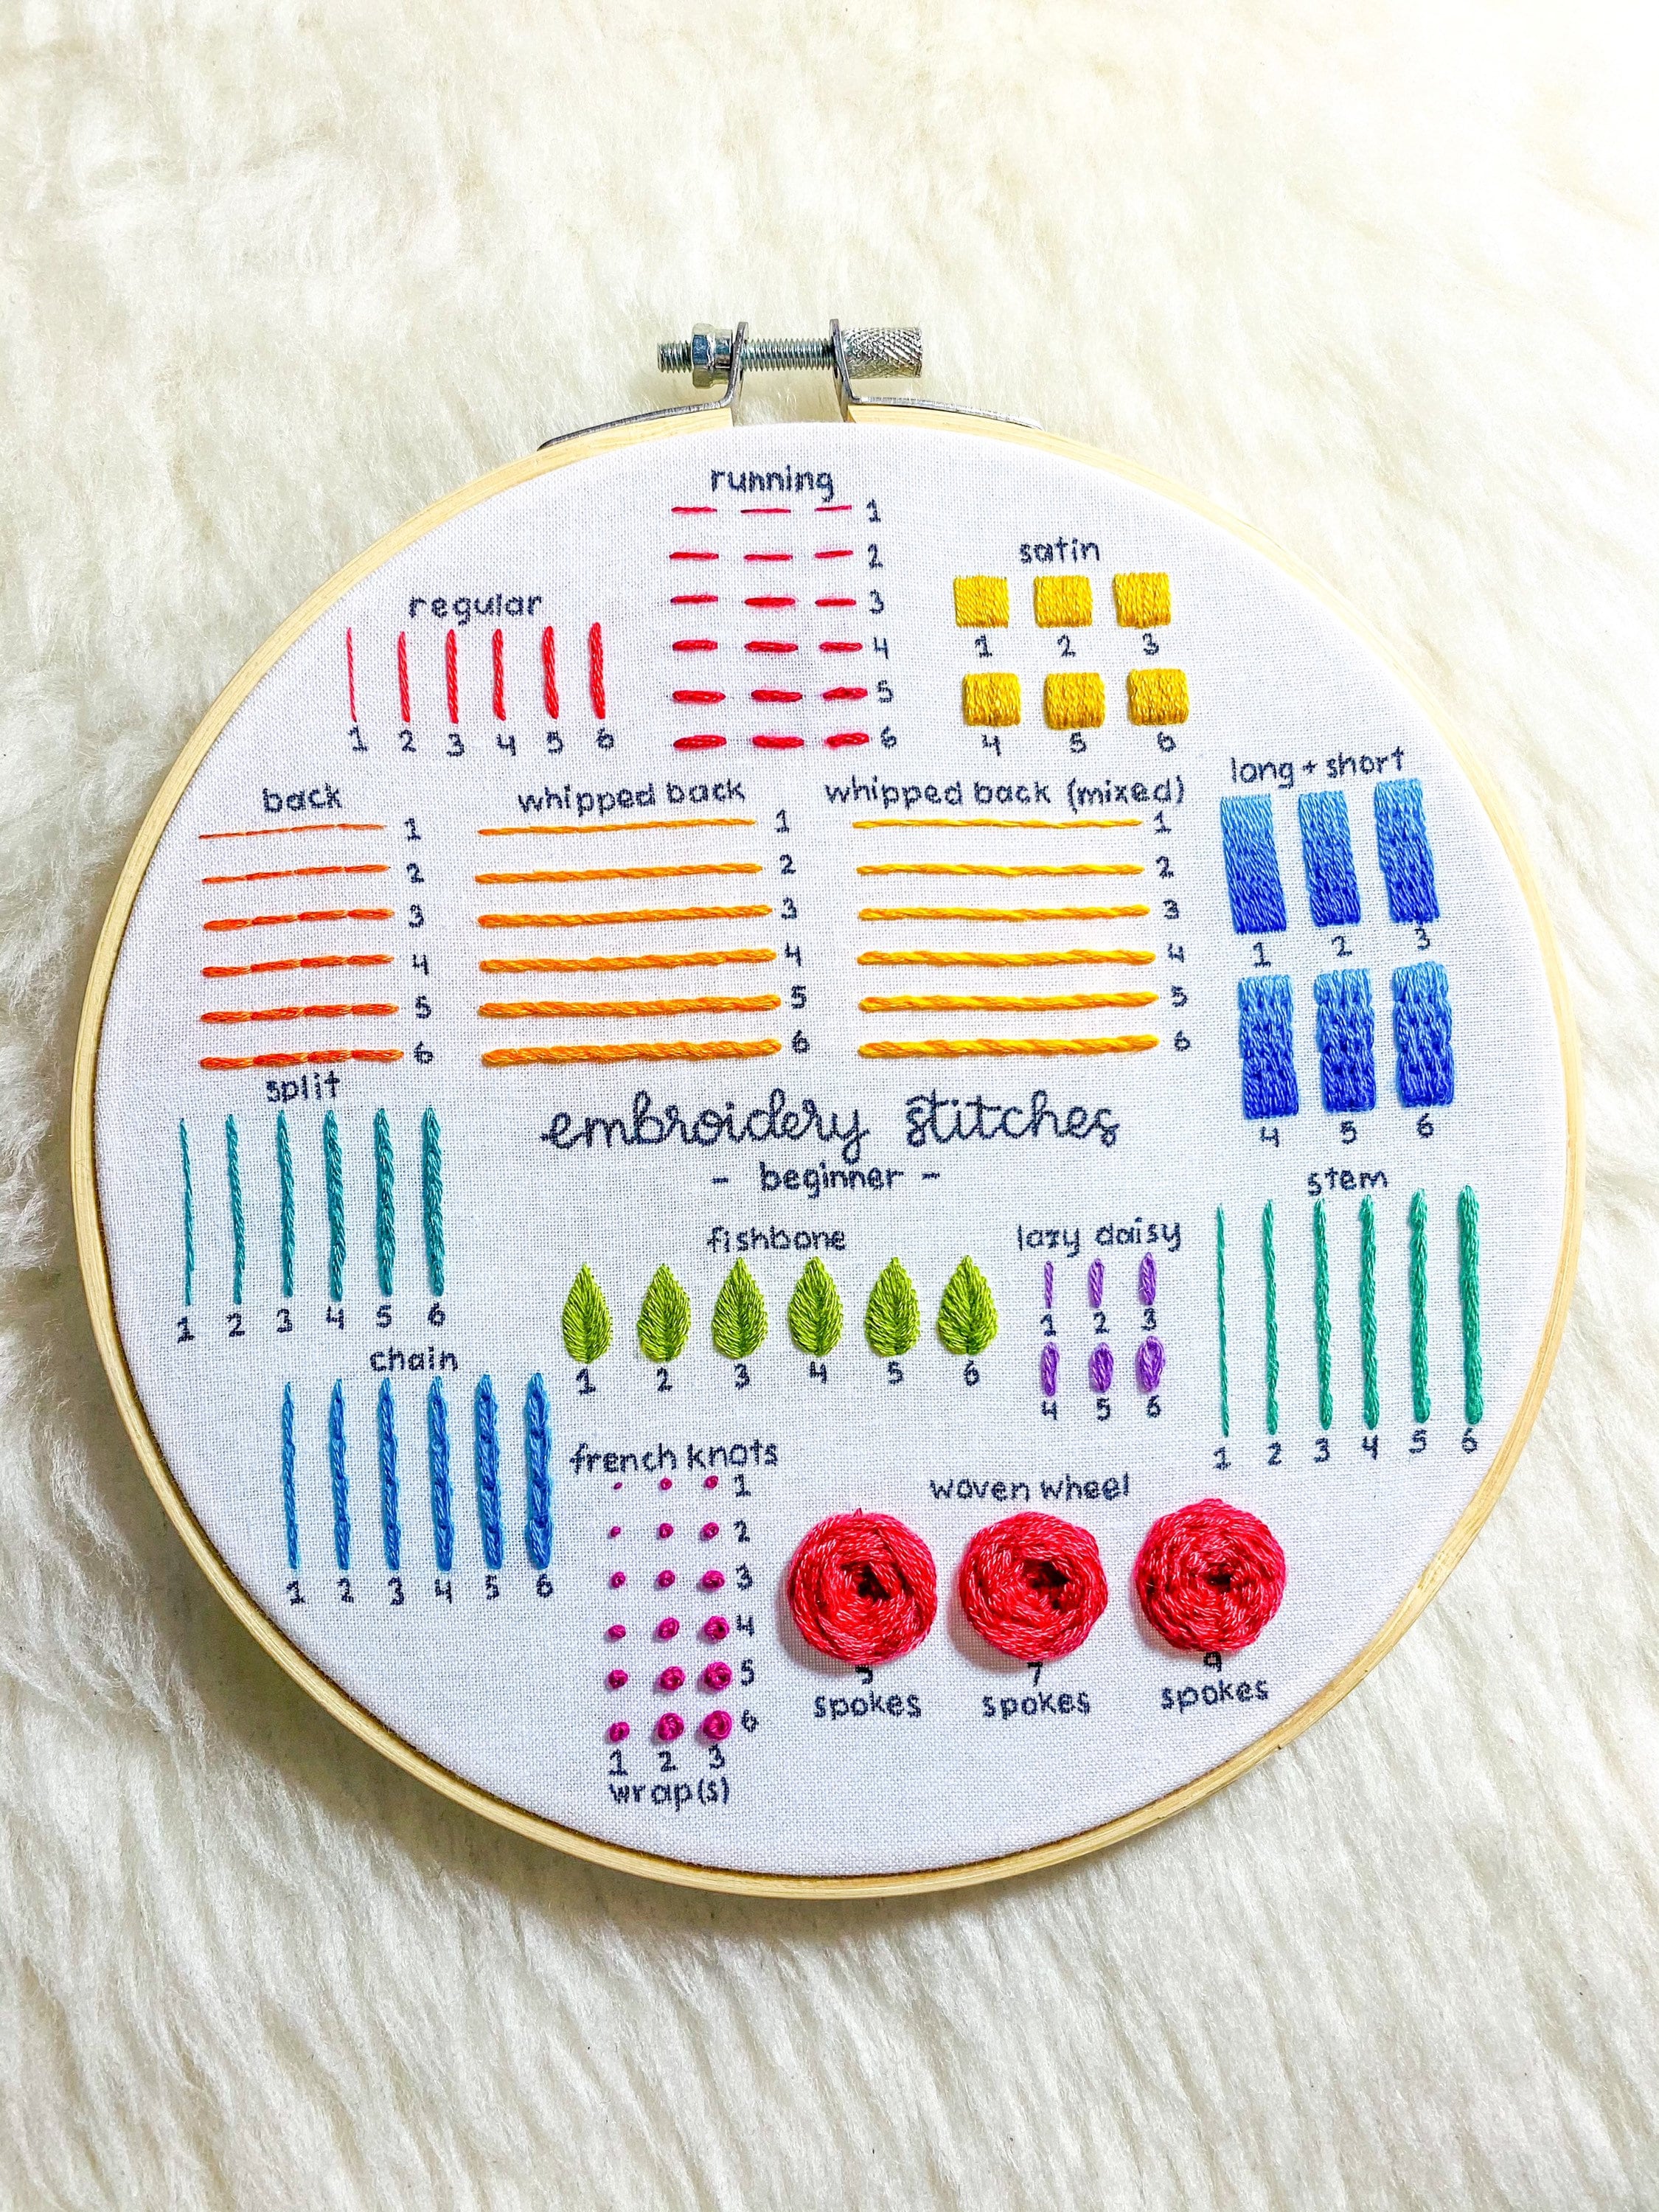 A Guide to Hand Embroidery: Tutorials, Patterns and More